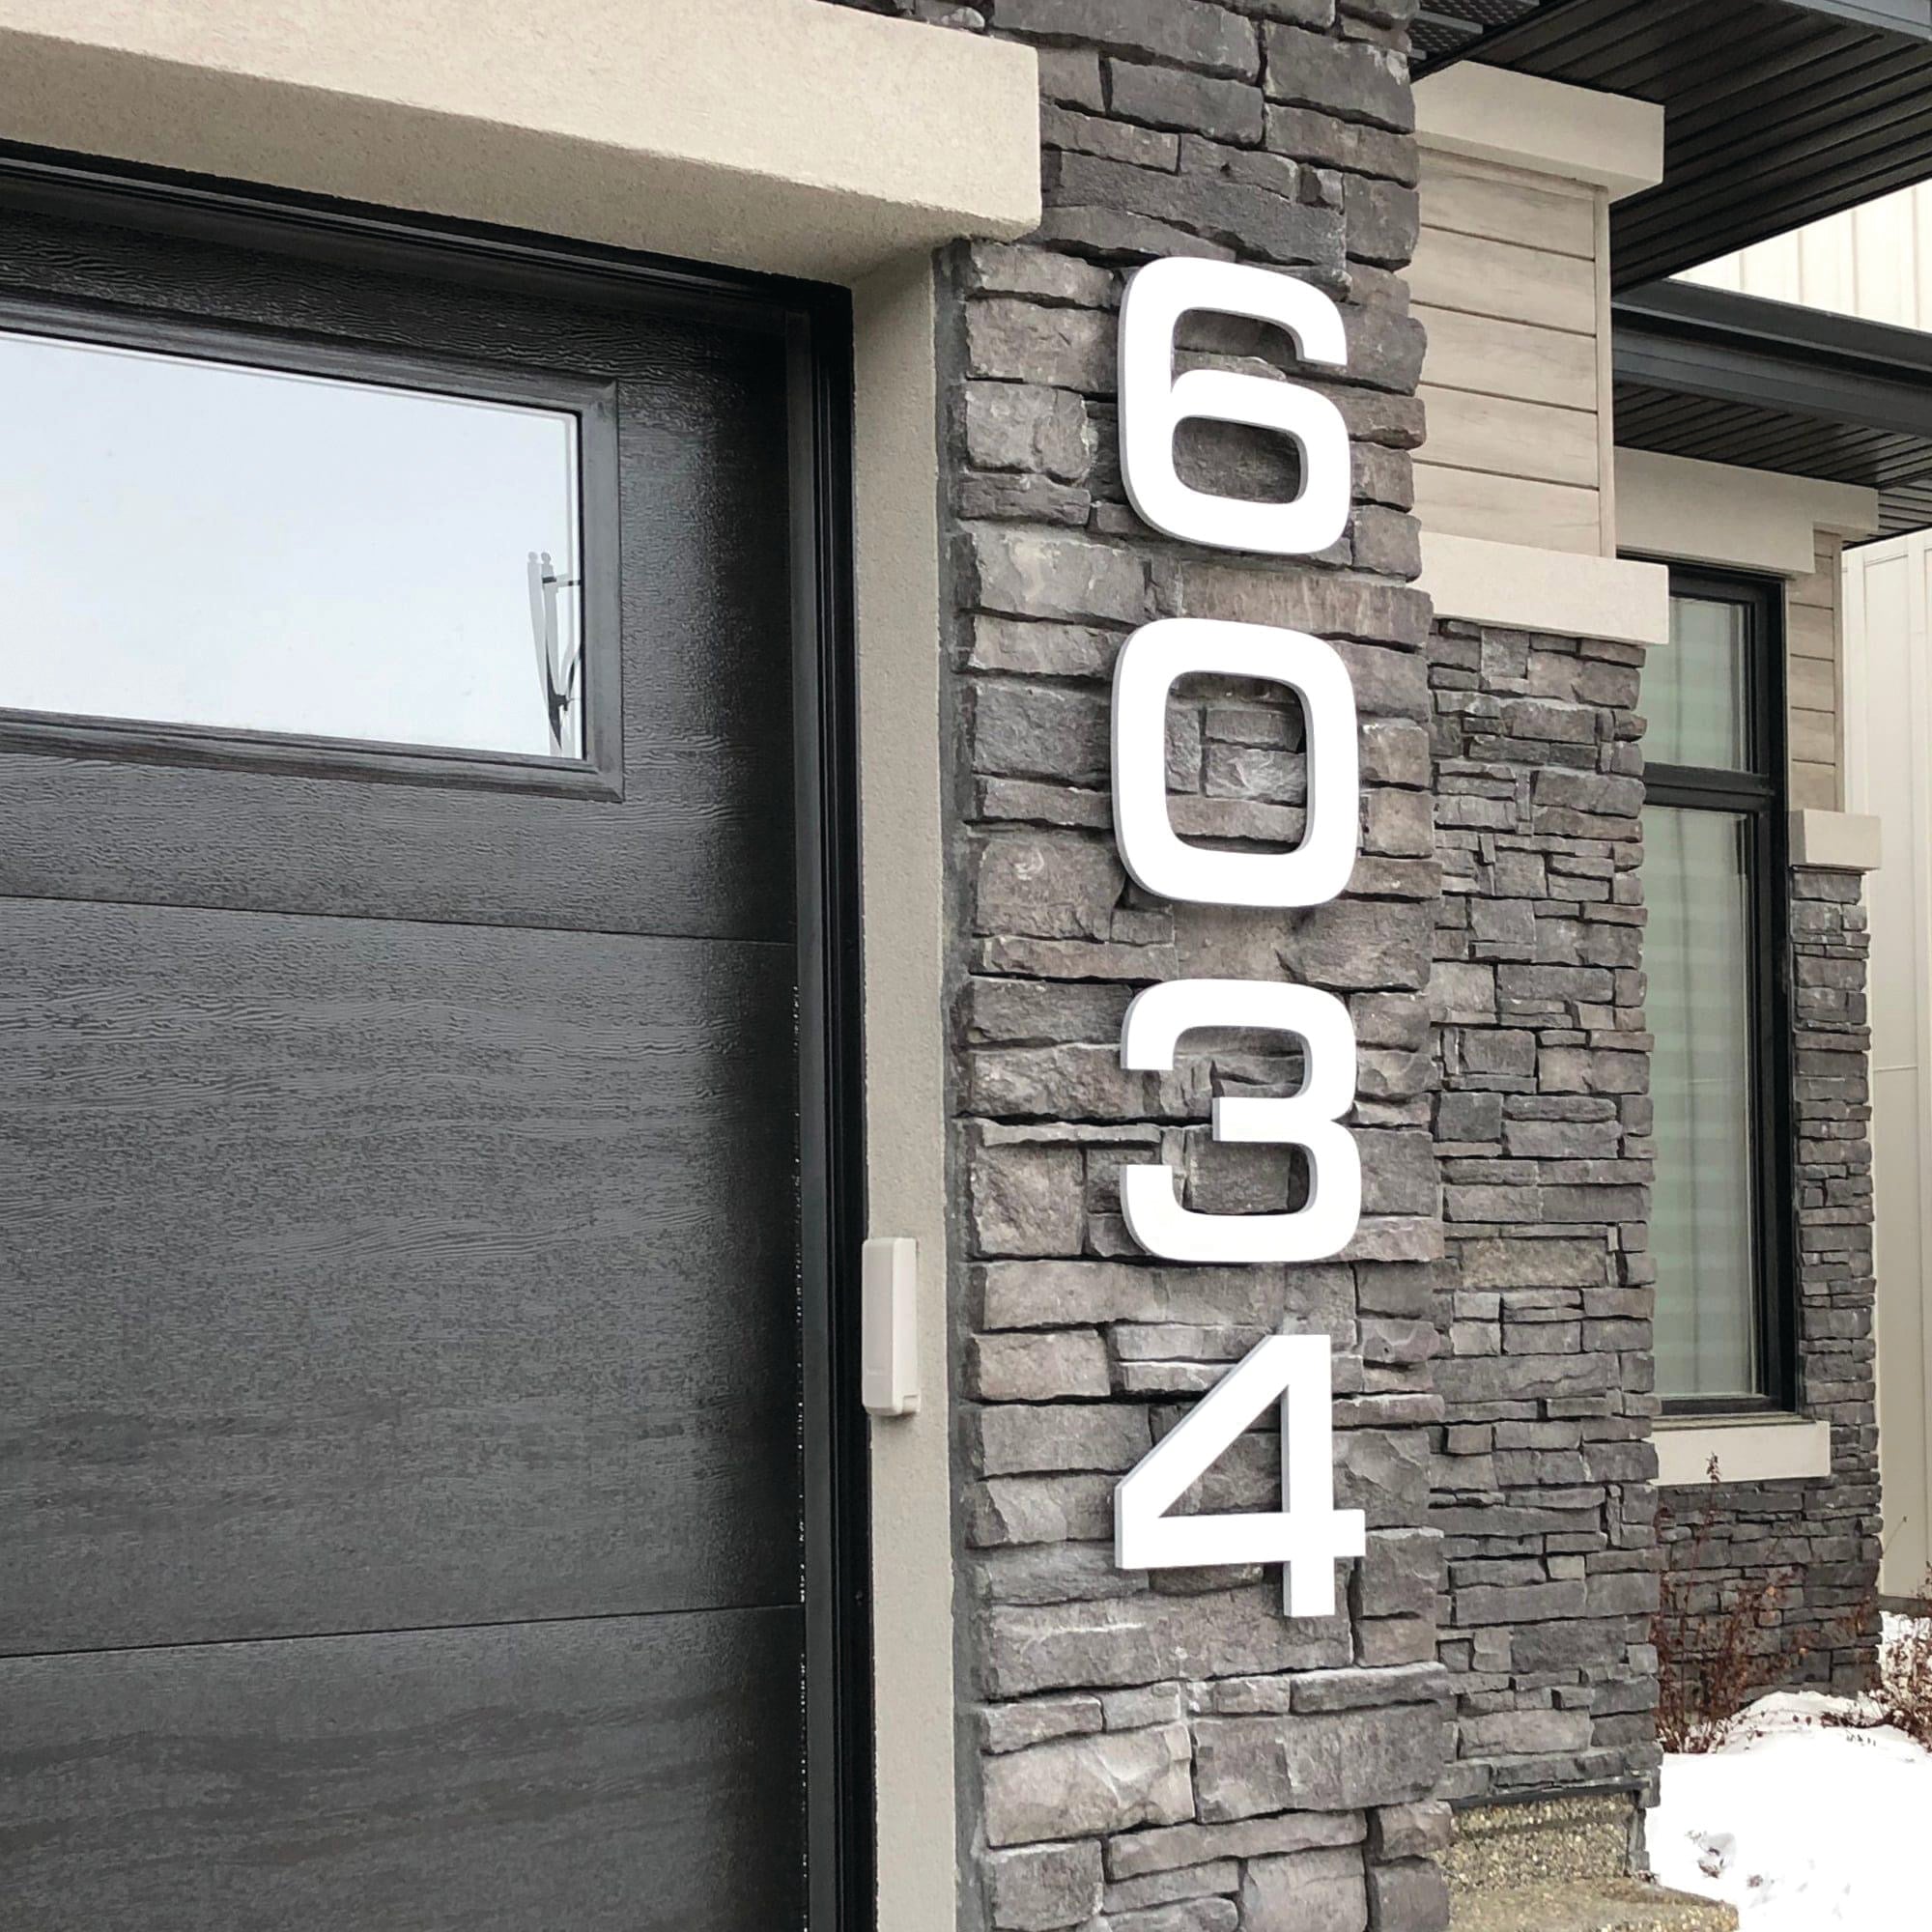 Size Matters: Choosing the Perfect Address Sign for Your Home